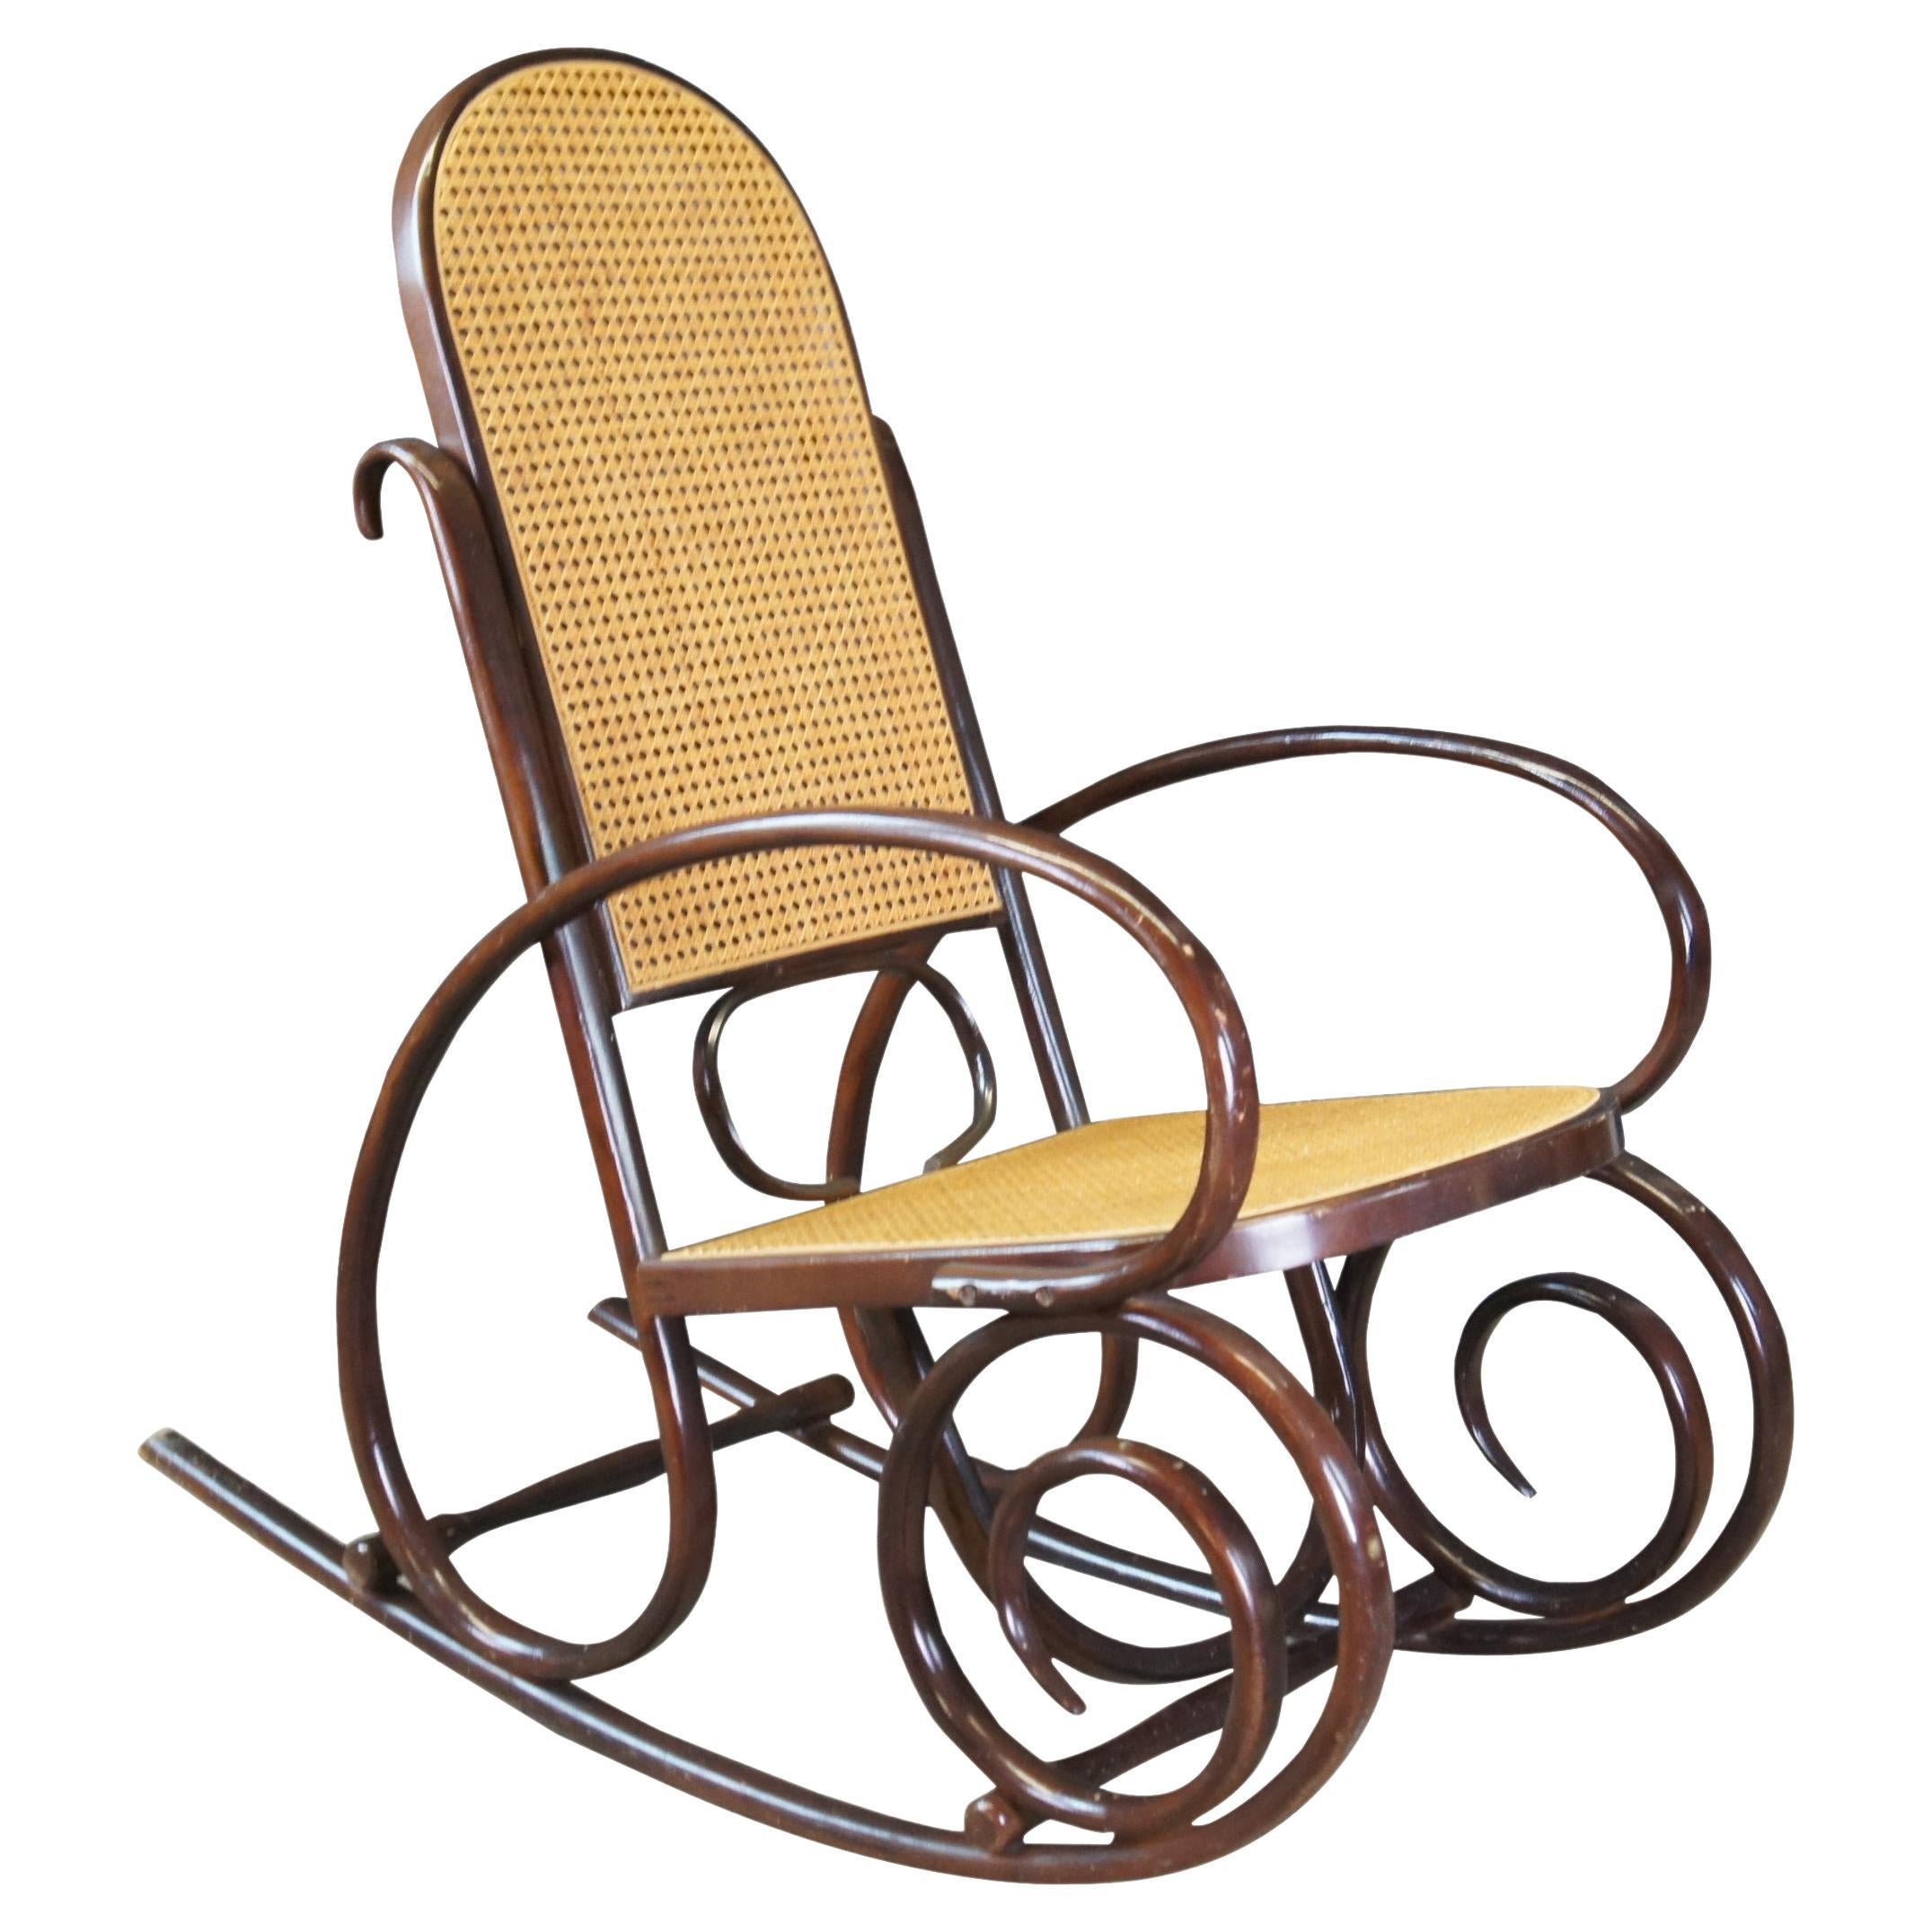 Iconic Thonet Style Bentwood Rocking Chair Natural Cane Rattan Seat Back Rocker For Sale